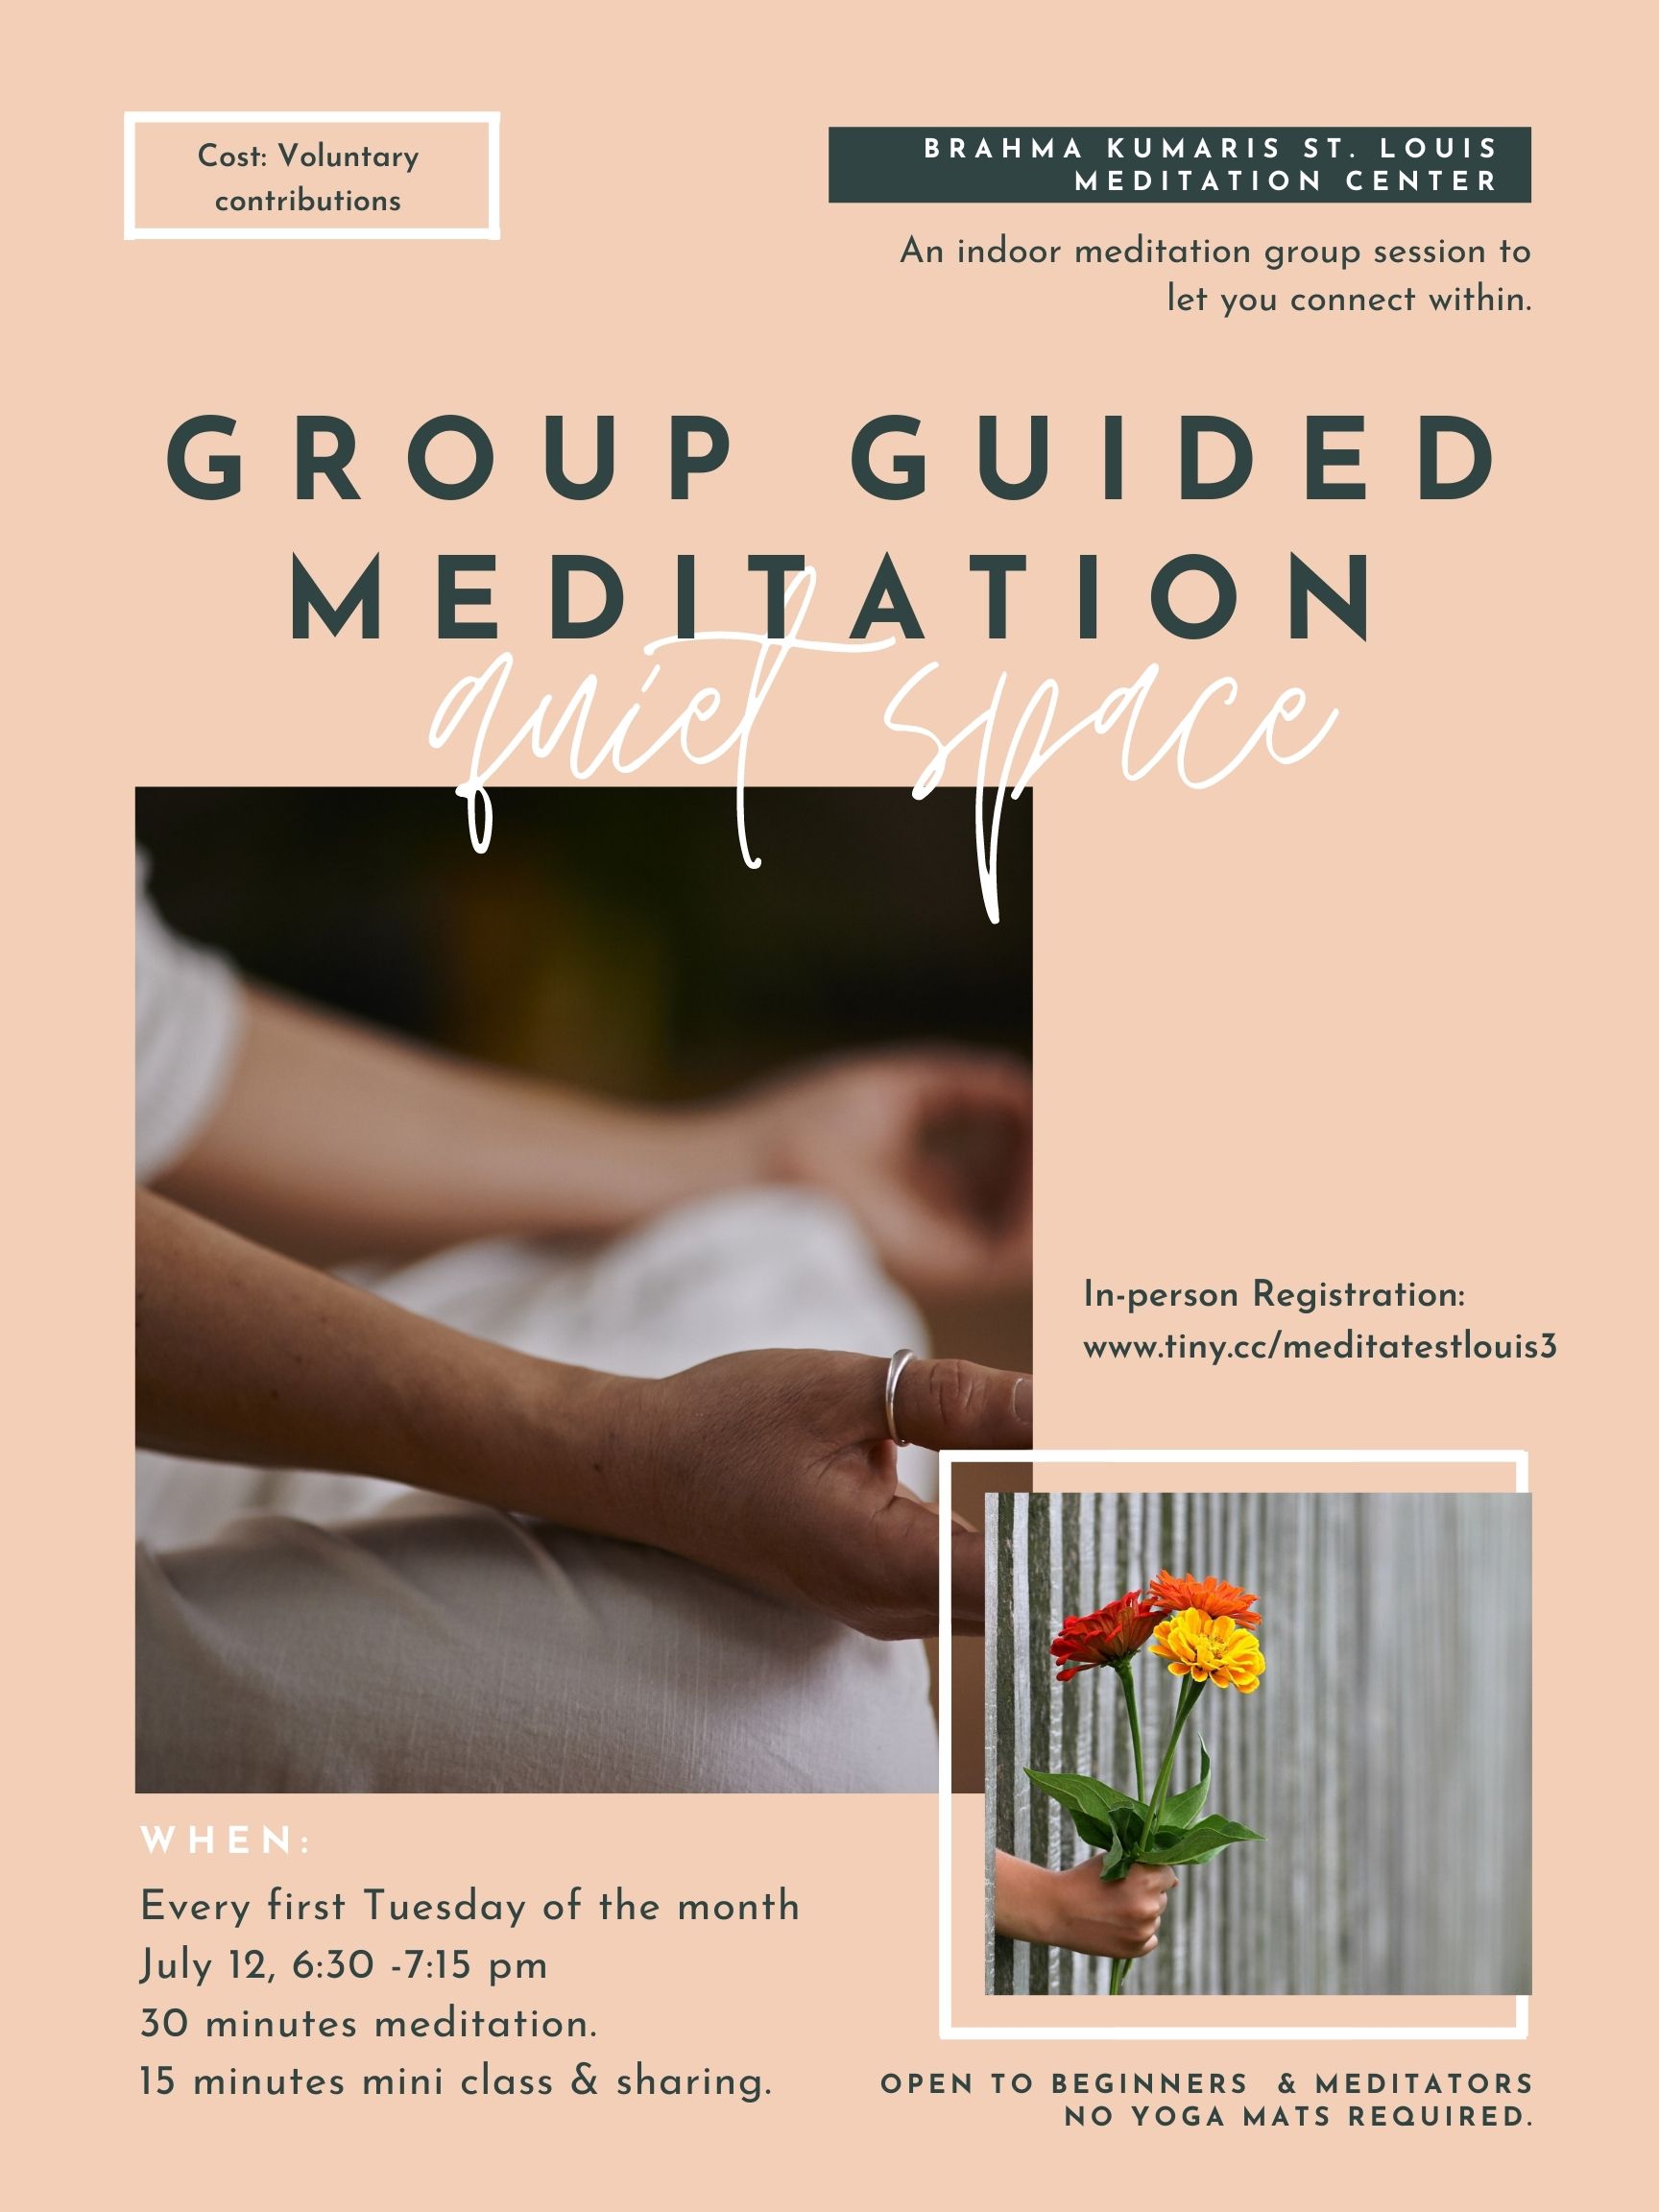 GROUP GUIDED MEDITATION